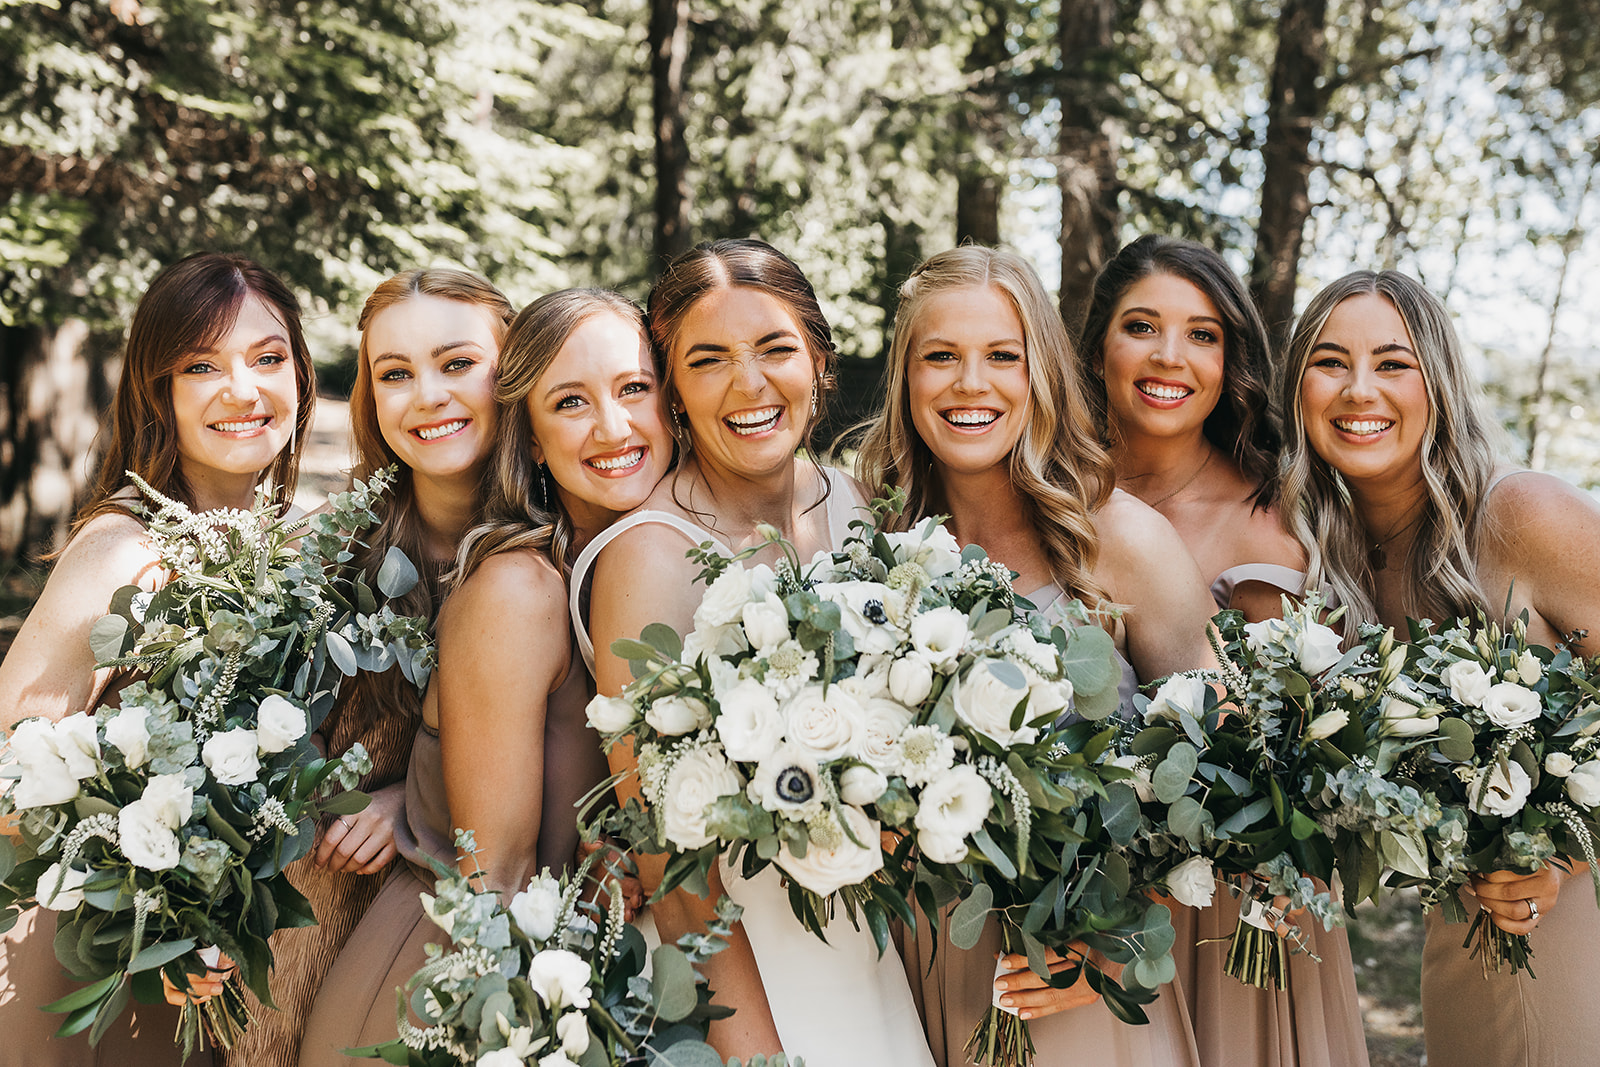 Bride and bridesmaids before the wedding ceremony at private lake house.